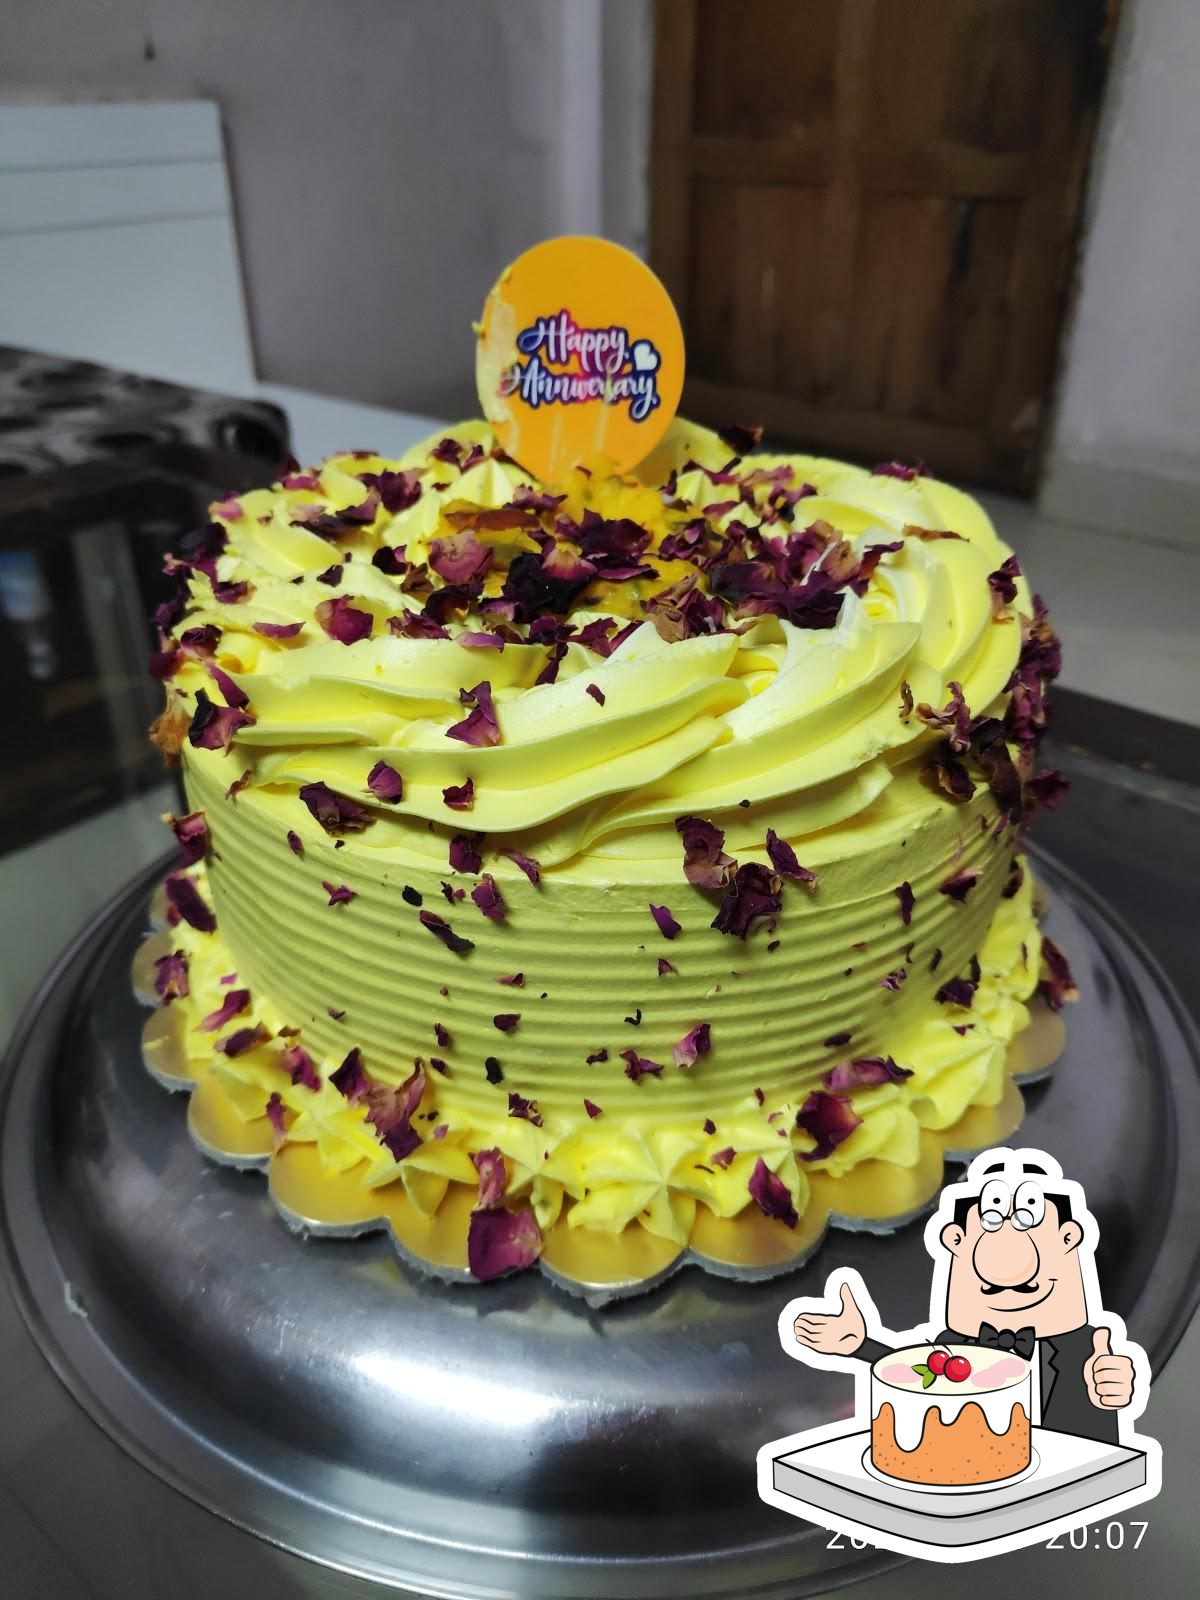 Job Available for Cake Maker in Cake Town - Other | Pune (Maharashtra)  Apply Now